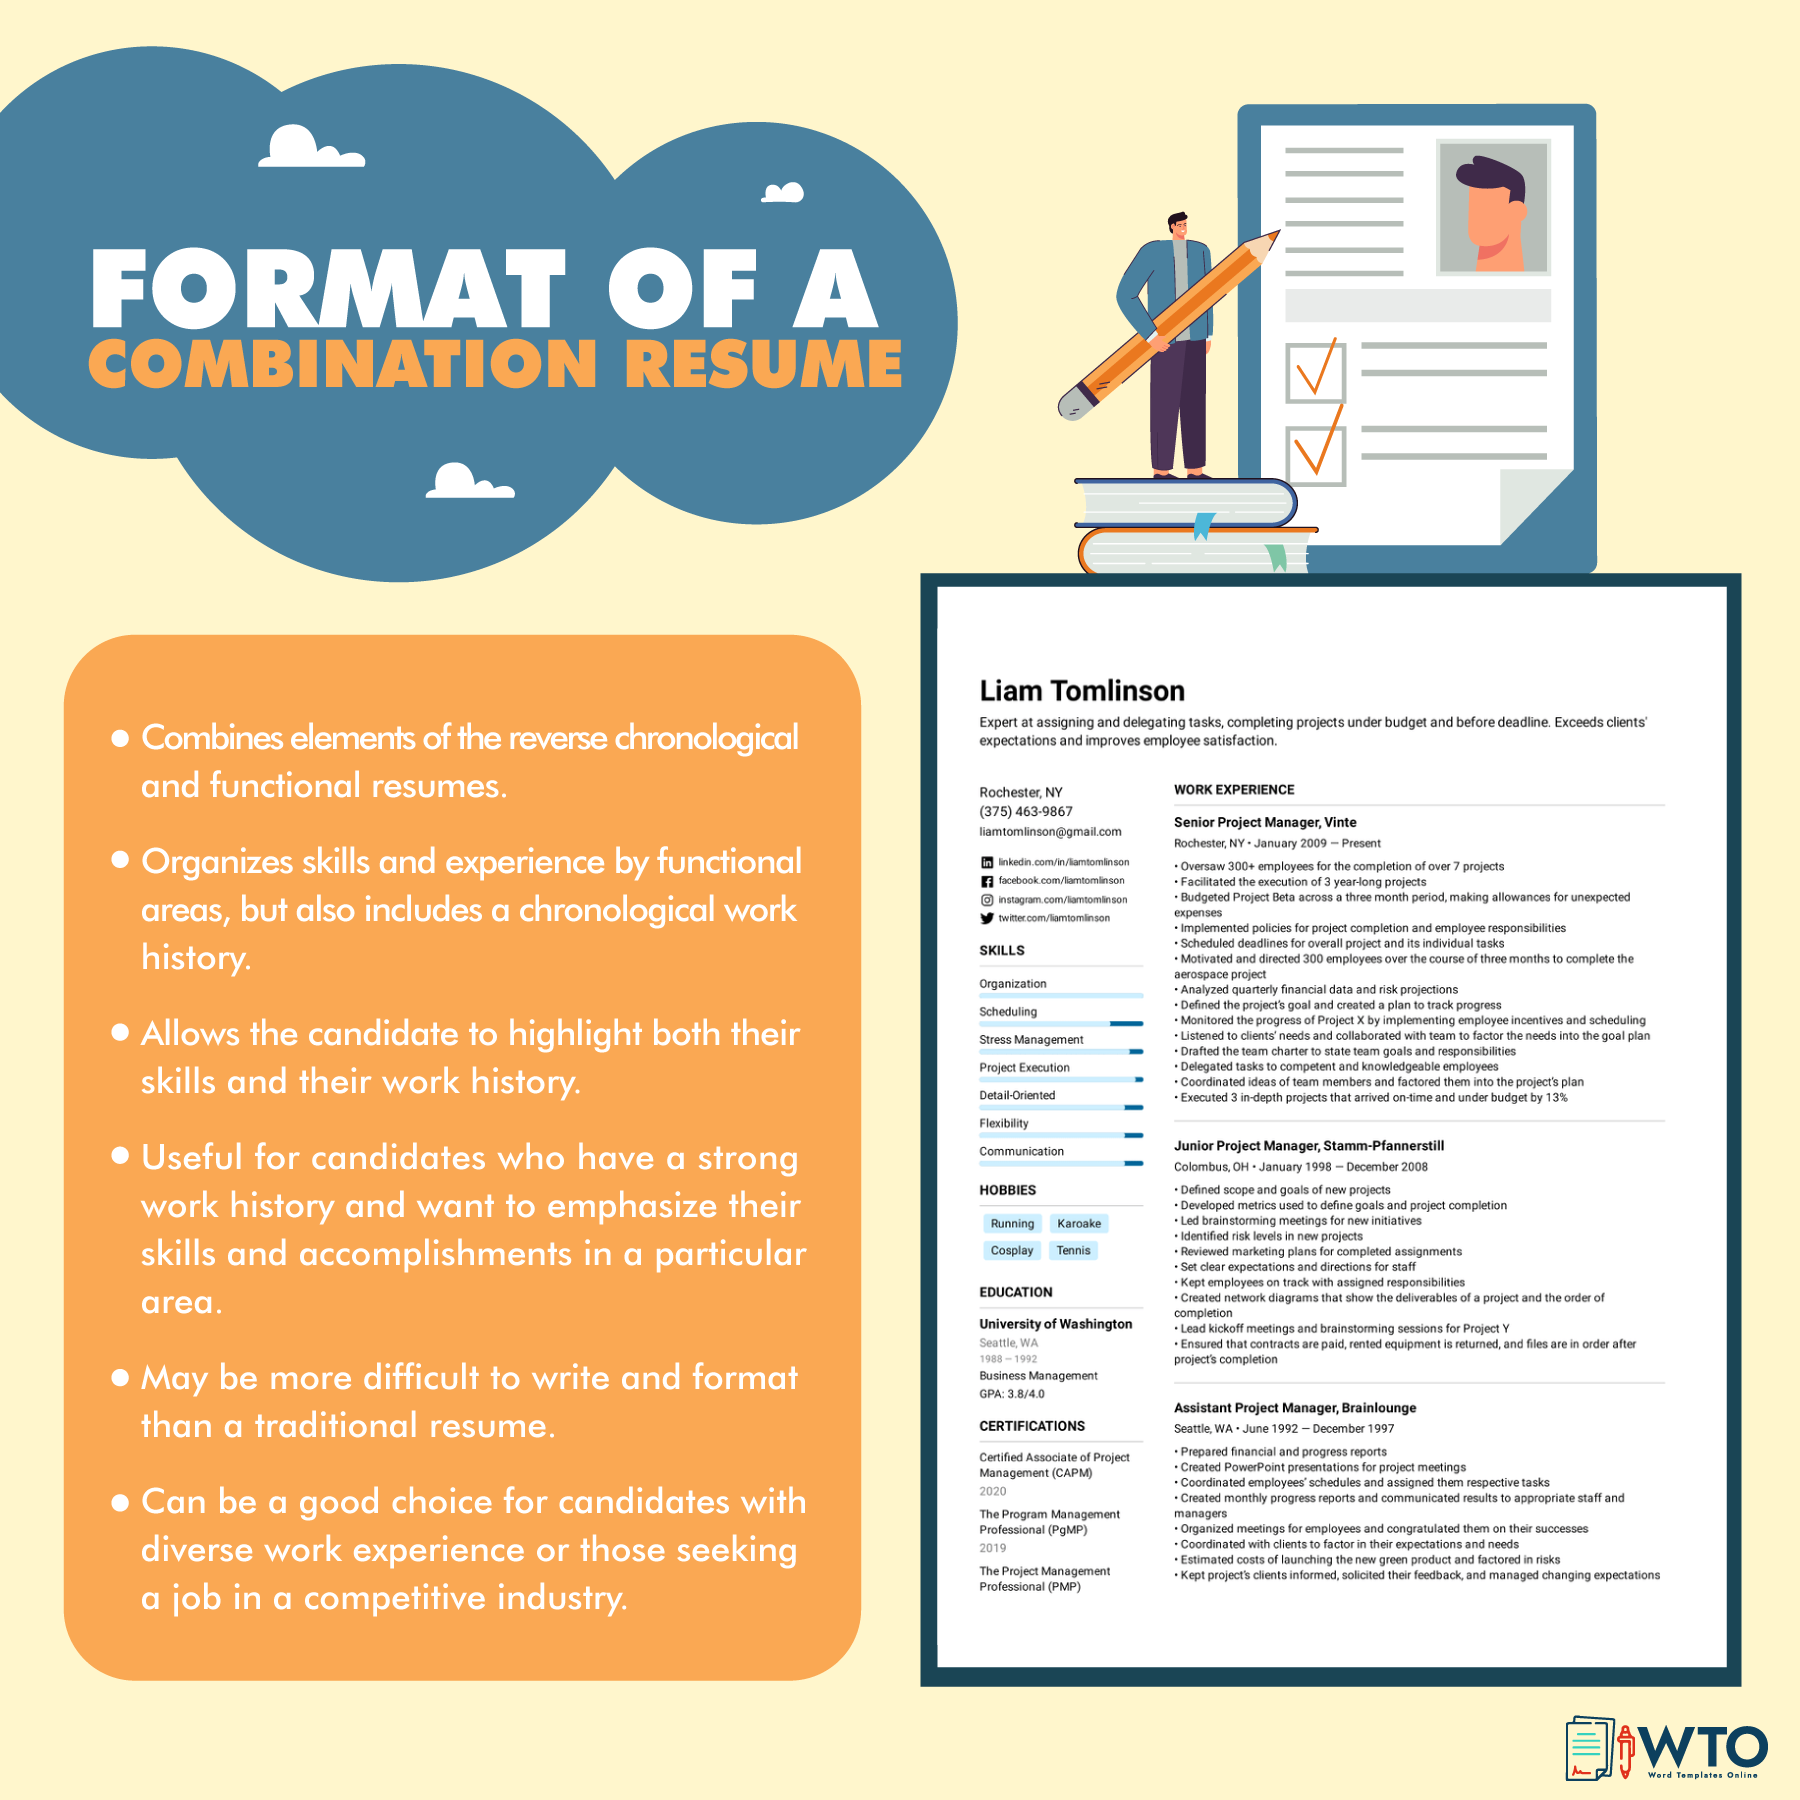 This infographic is about the format of a Hybrid Resume.